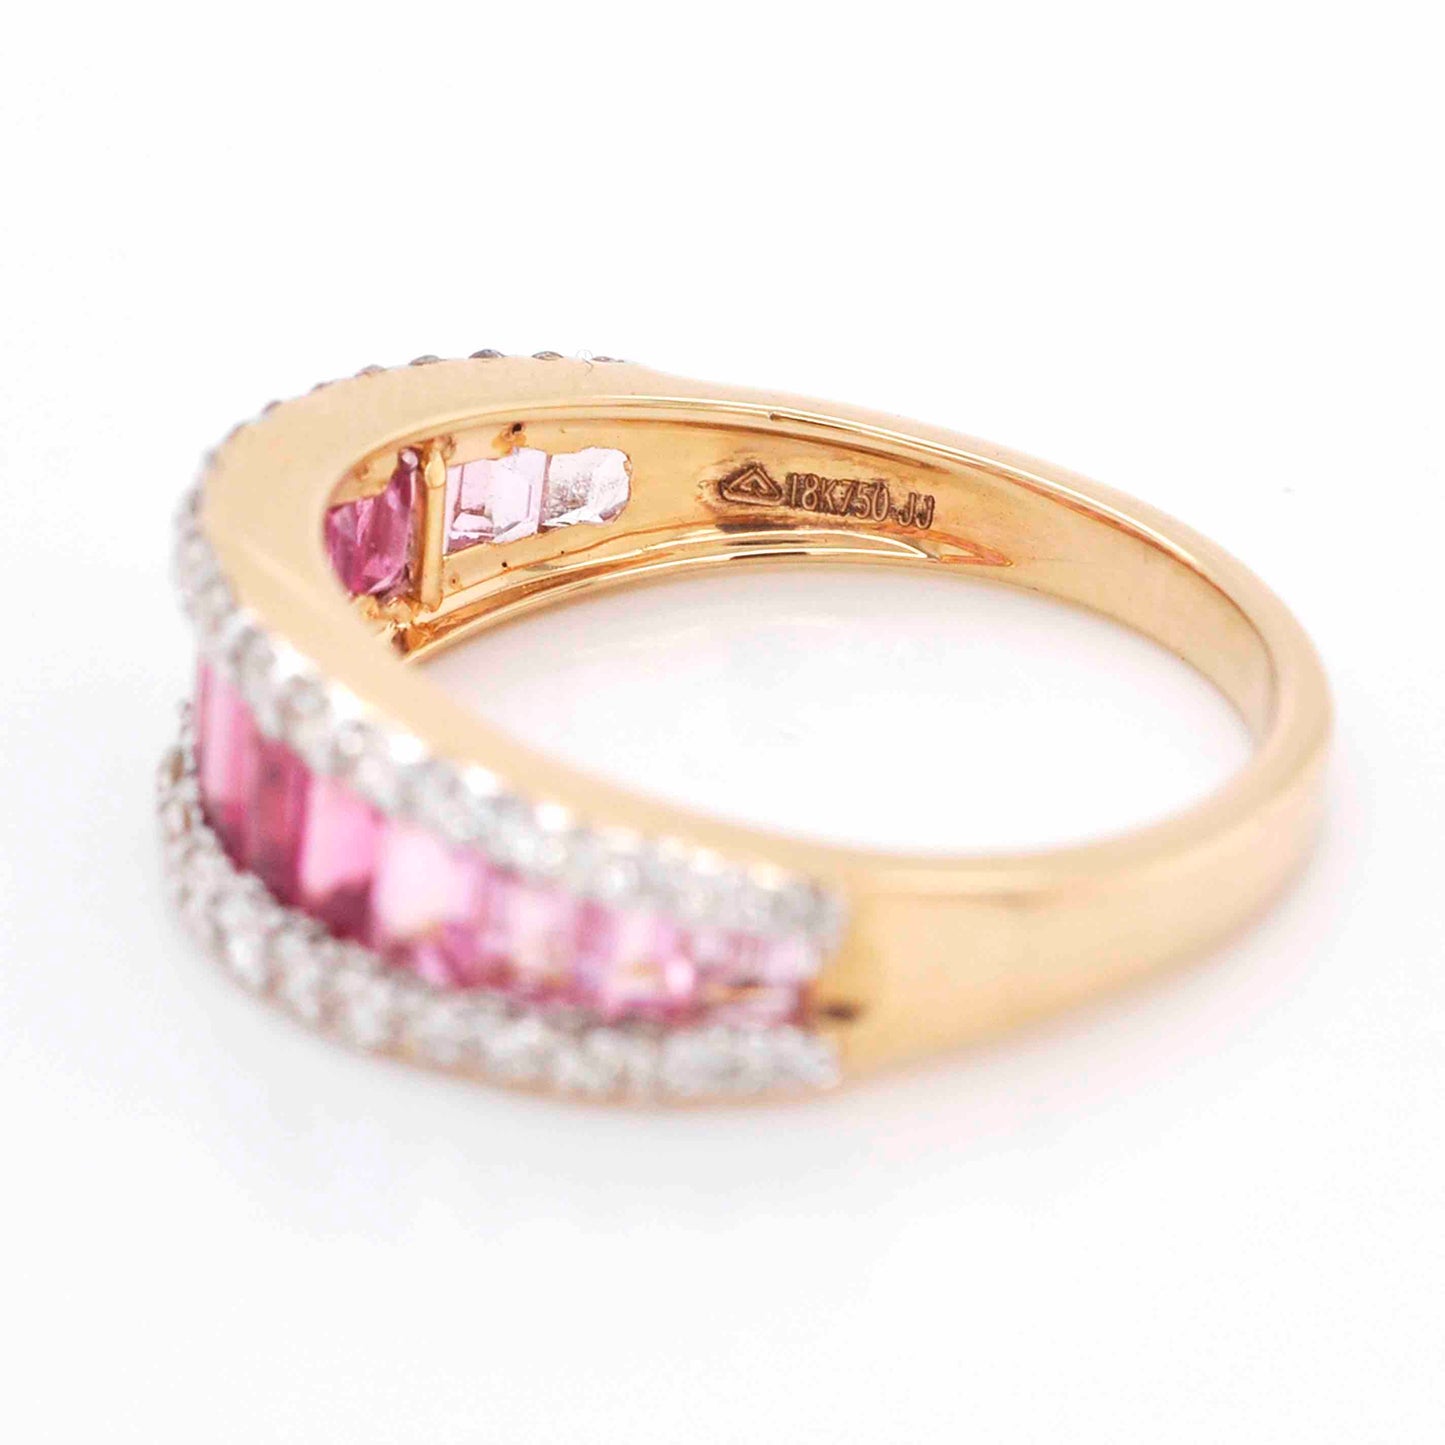 Stylish pink baguette ring for women